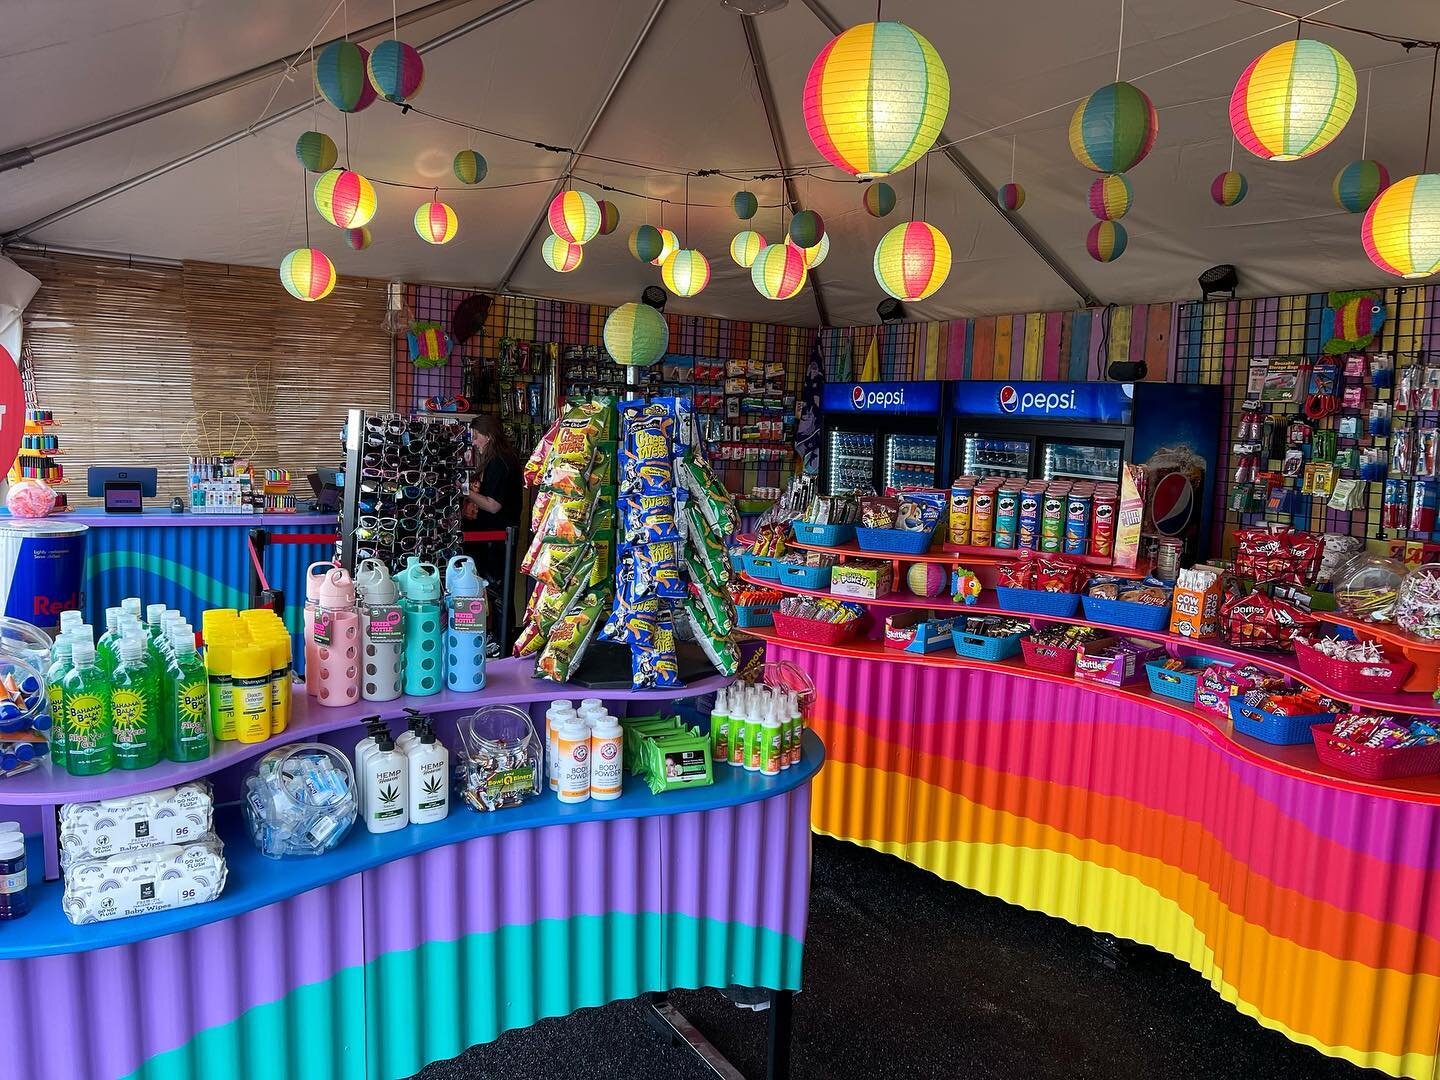 Check out this new General Store build we took part in with @festival.outfitter for @somethinginthewater music festival! Bright colors, acrylic edging and wave accents everywhere. This was a super fun one to have in the shop! 

Design by @dark.moon.d